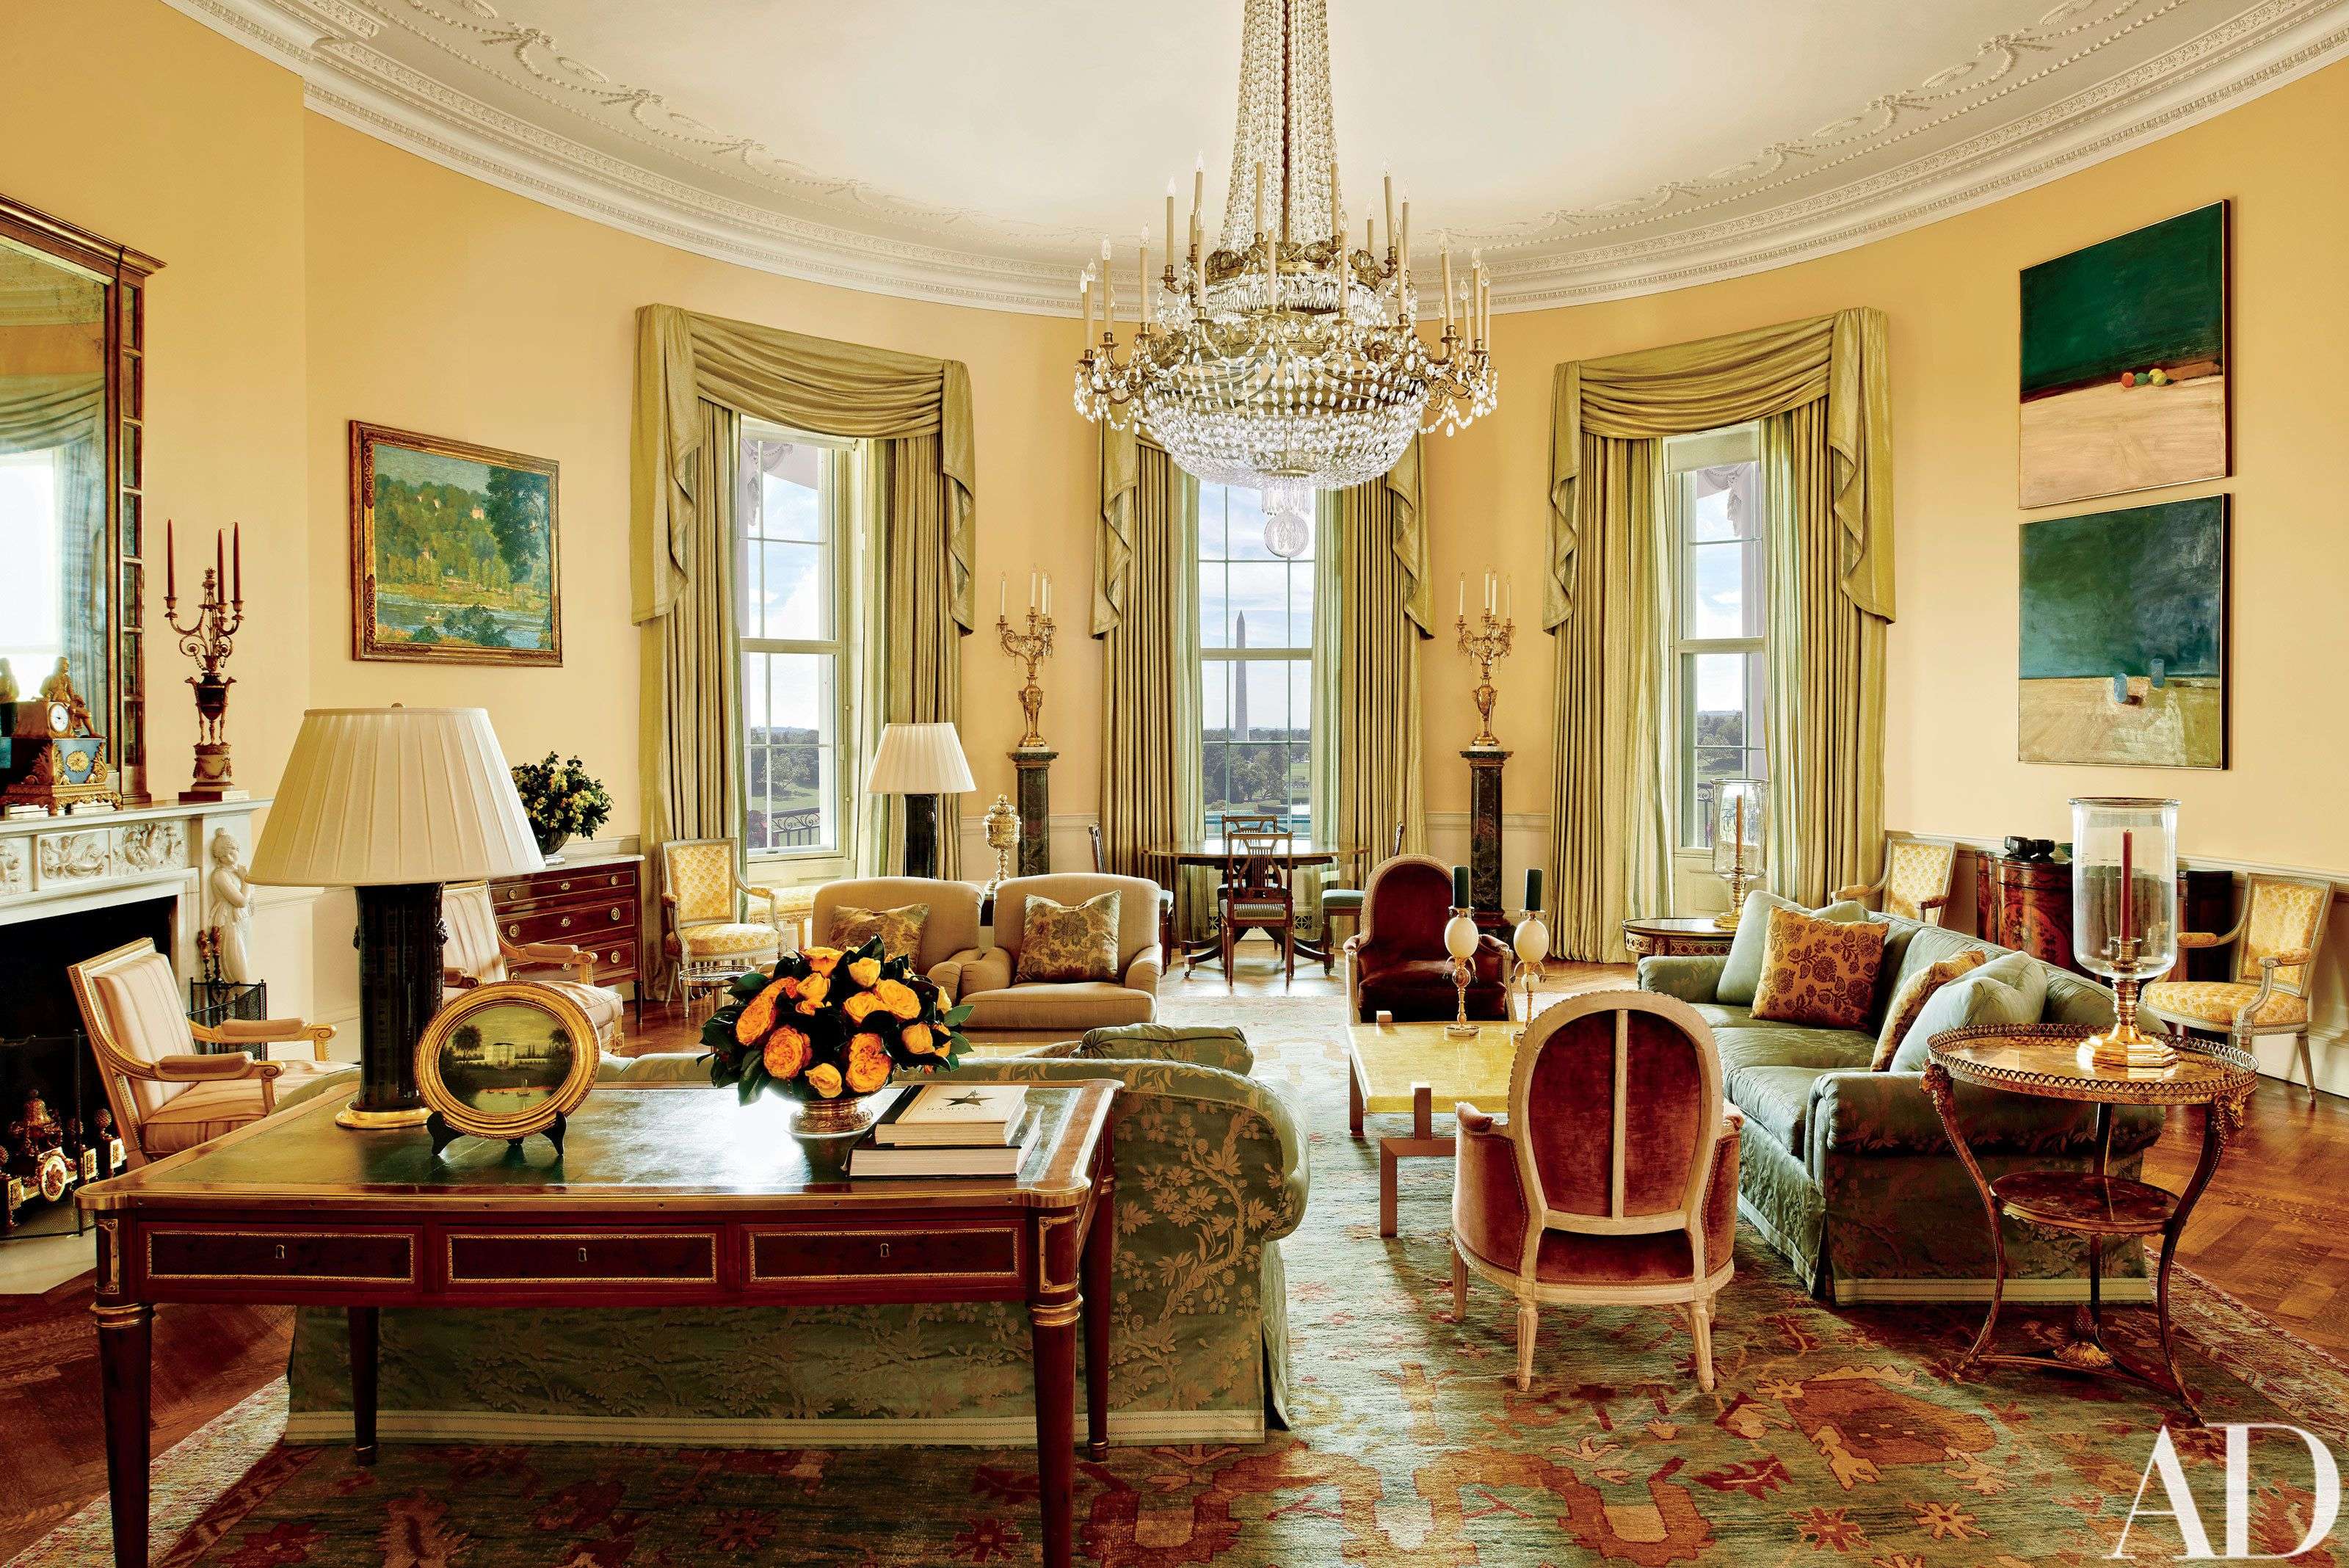 This image provided by Architectural Digest shows the Yellow Oval Room in the White House. Designer Michael S. Smith specified a Donald Kaufman paint for the Yellow Oval Room. Artworks by Paul Cézanne and Daniel Garber flank the mantel. Smith mellowed the Yellow Oval Room with smoky browns, greens, golds, and blues. The 1978 Camp David peace accords were signed at the antique Denis-Louis Ancellet desk, front left. (Michael Mundy/Architectural Digest via AP)